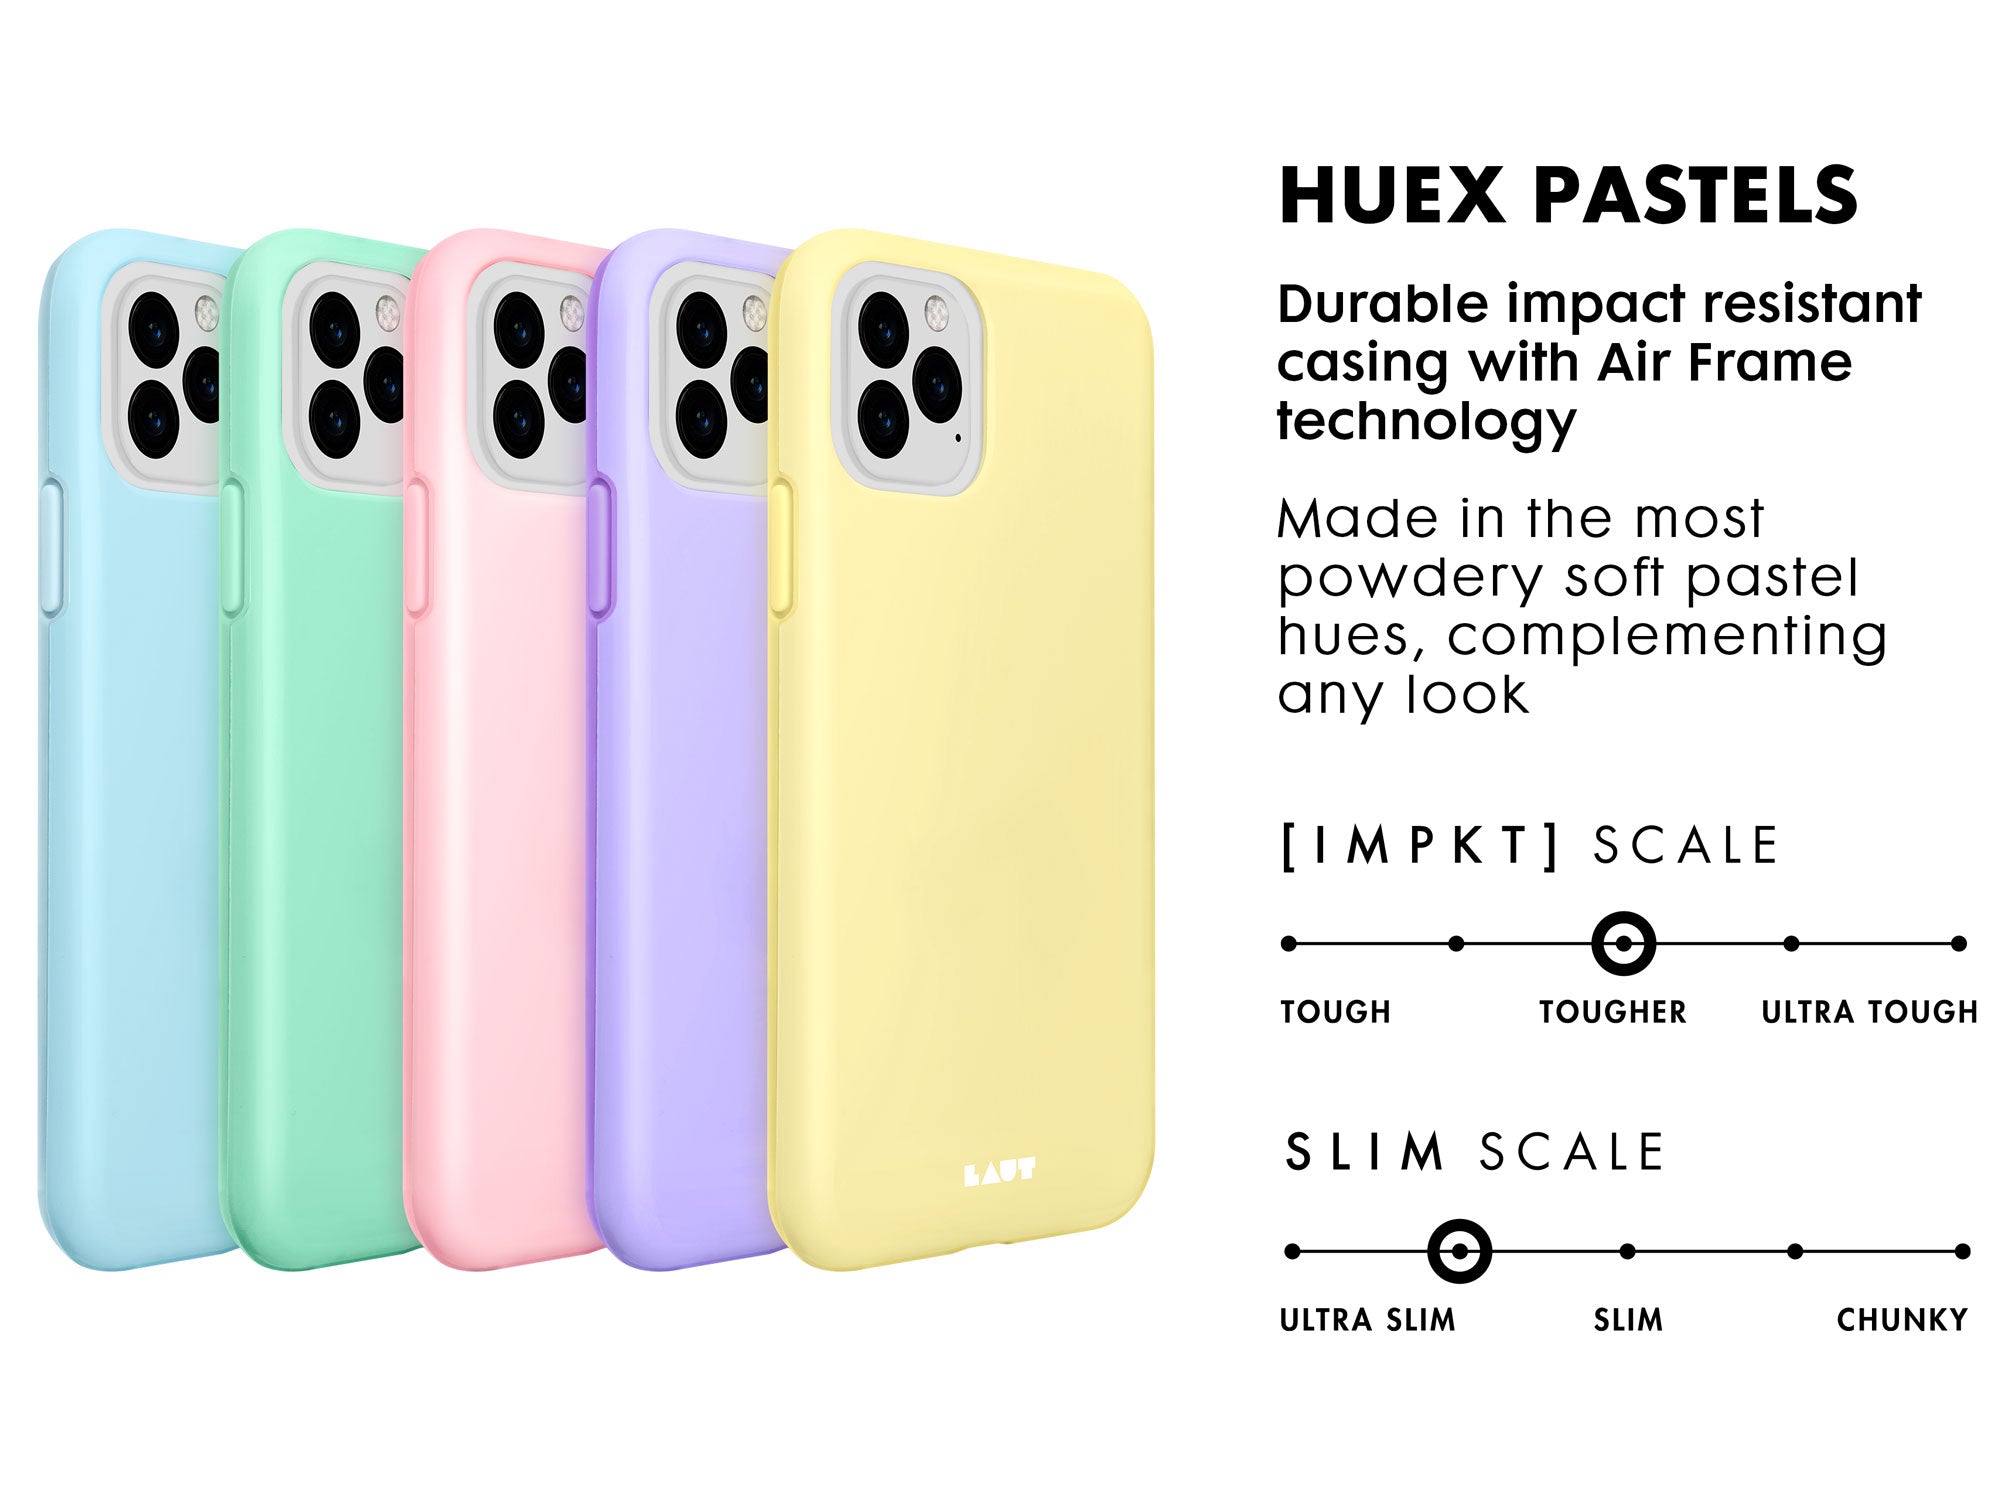 HUEX Pastels for iPhone 11 series